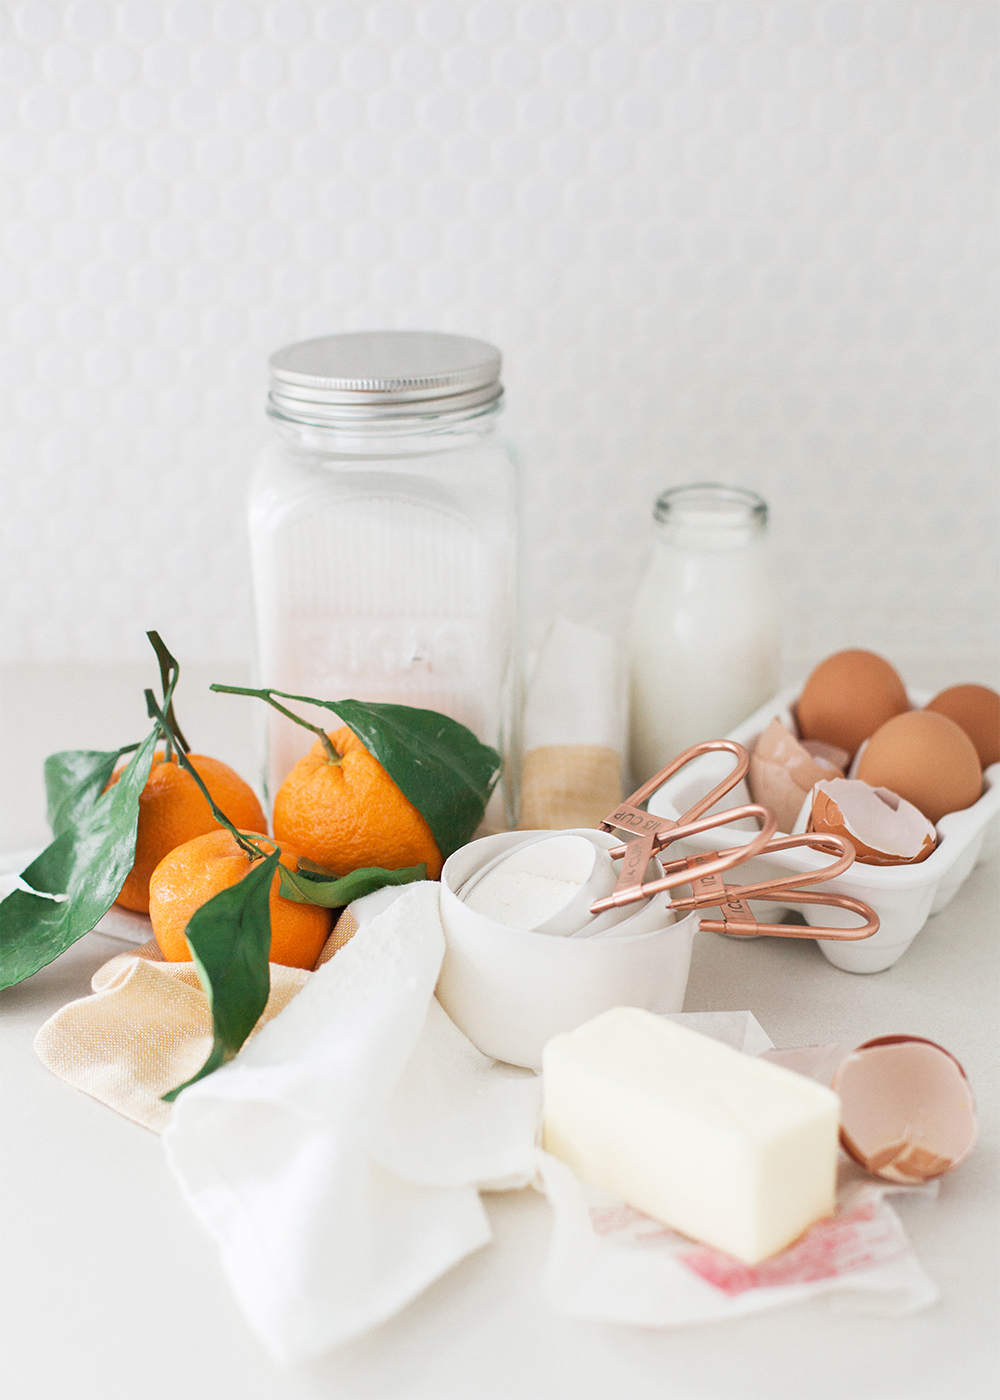 ingredients for a cake with fresh oranges